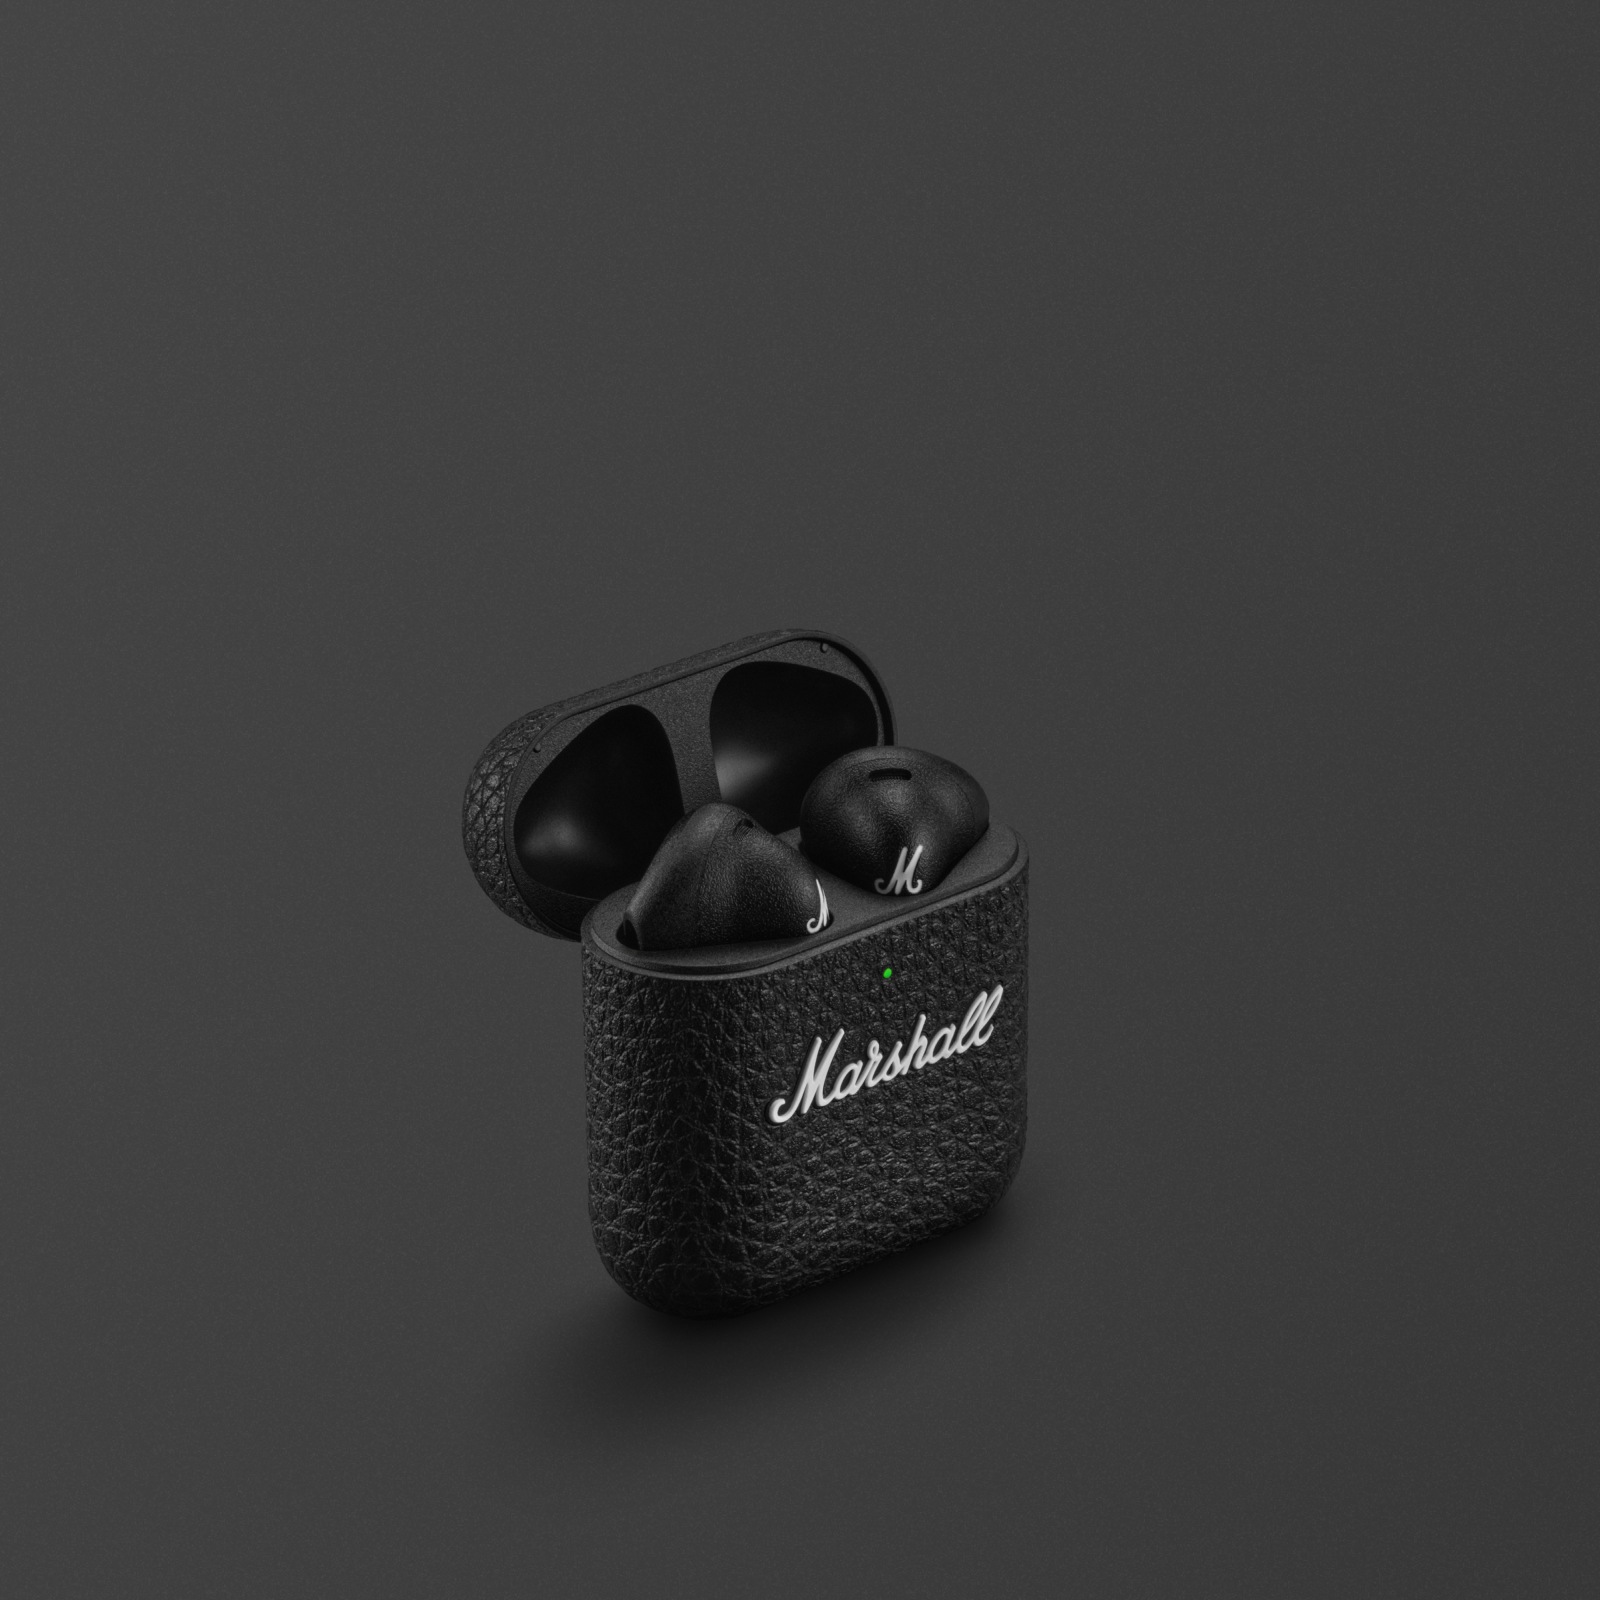 Marshall Minor IV Black wireless earbuds against a gray background.